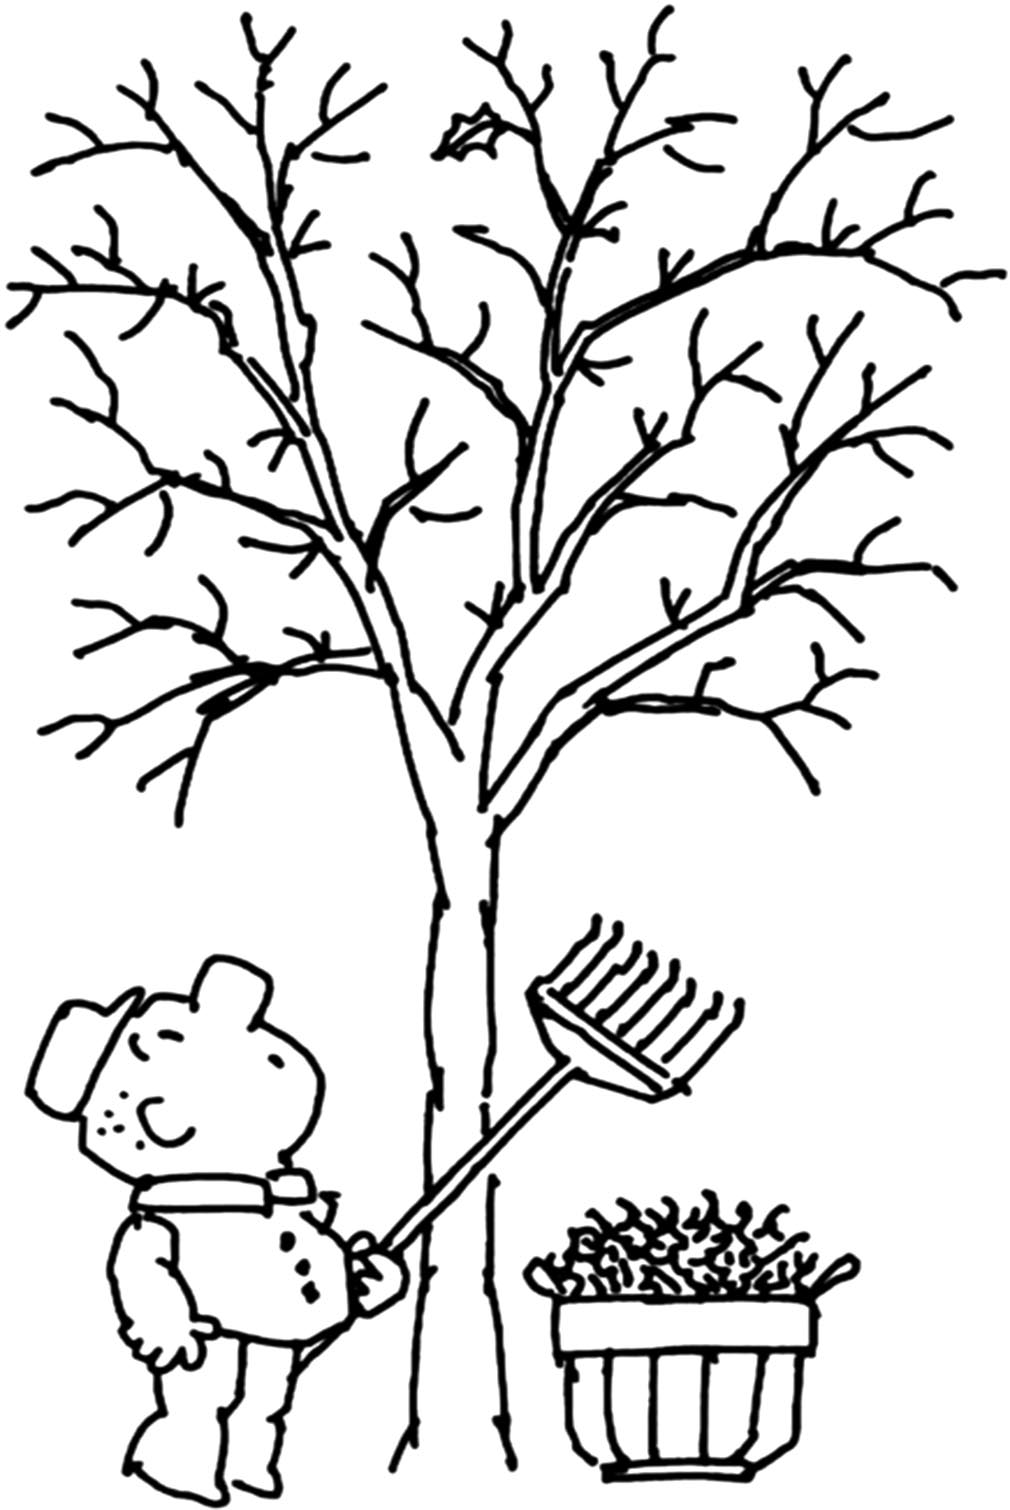 A man Is Raking Leaves Coloring Pages